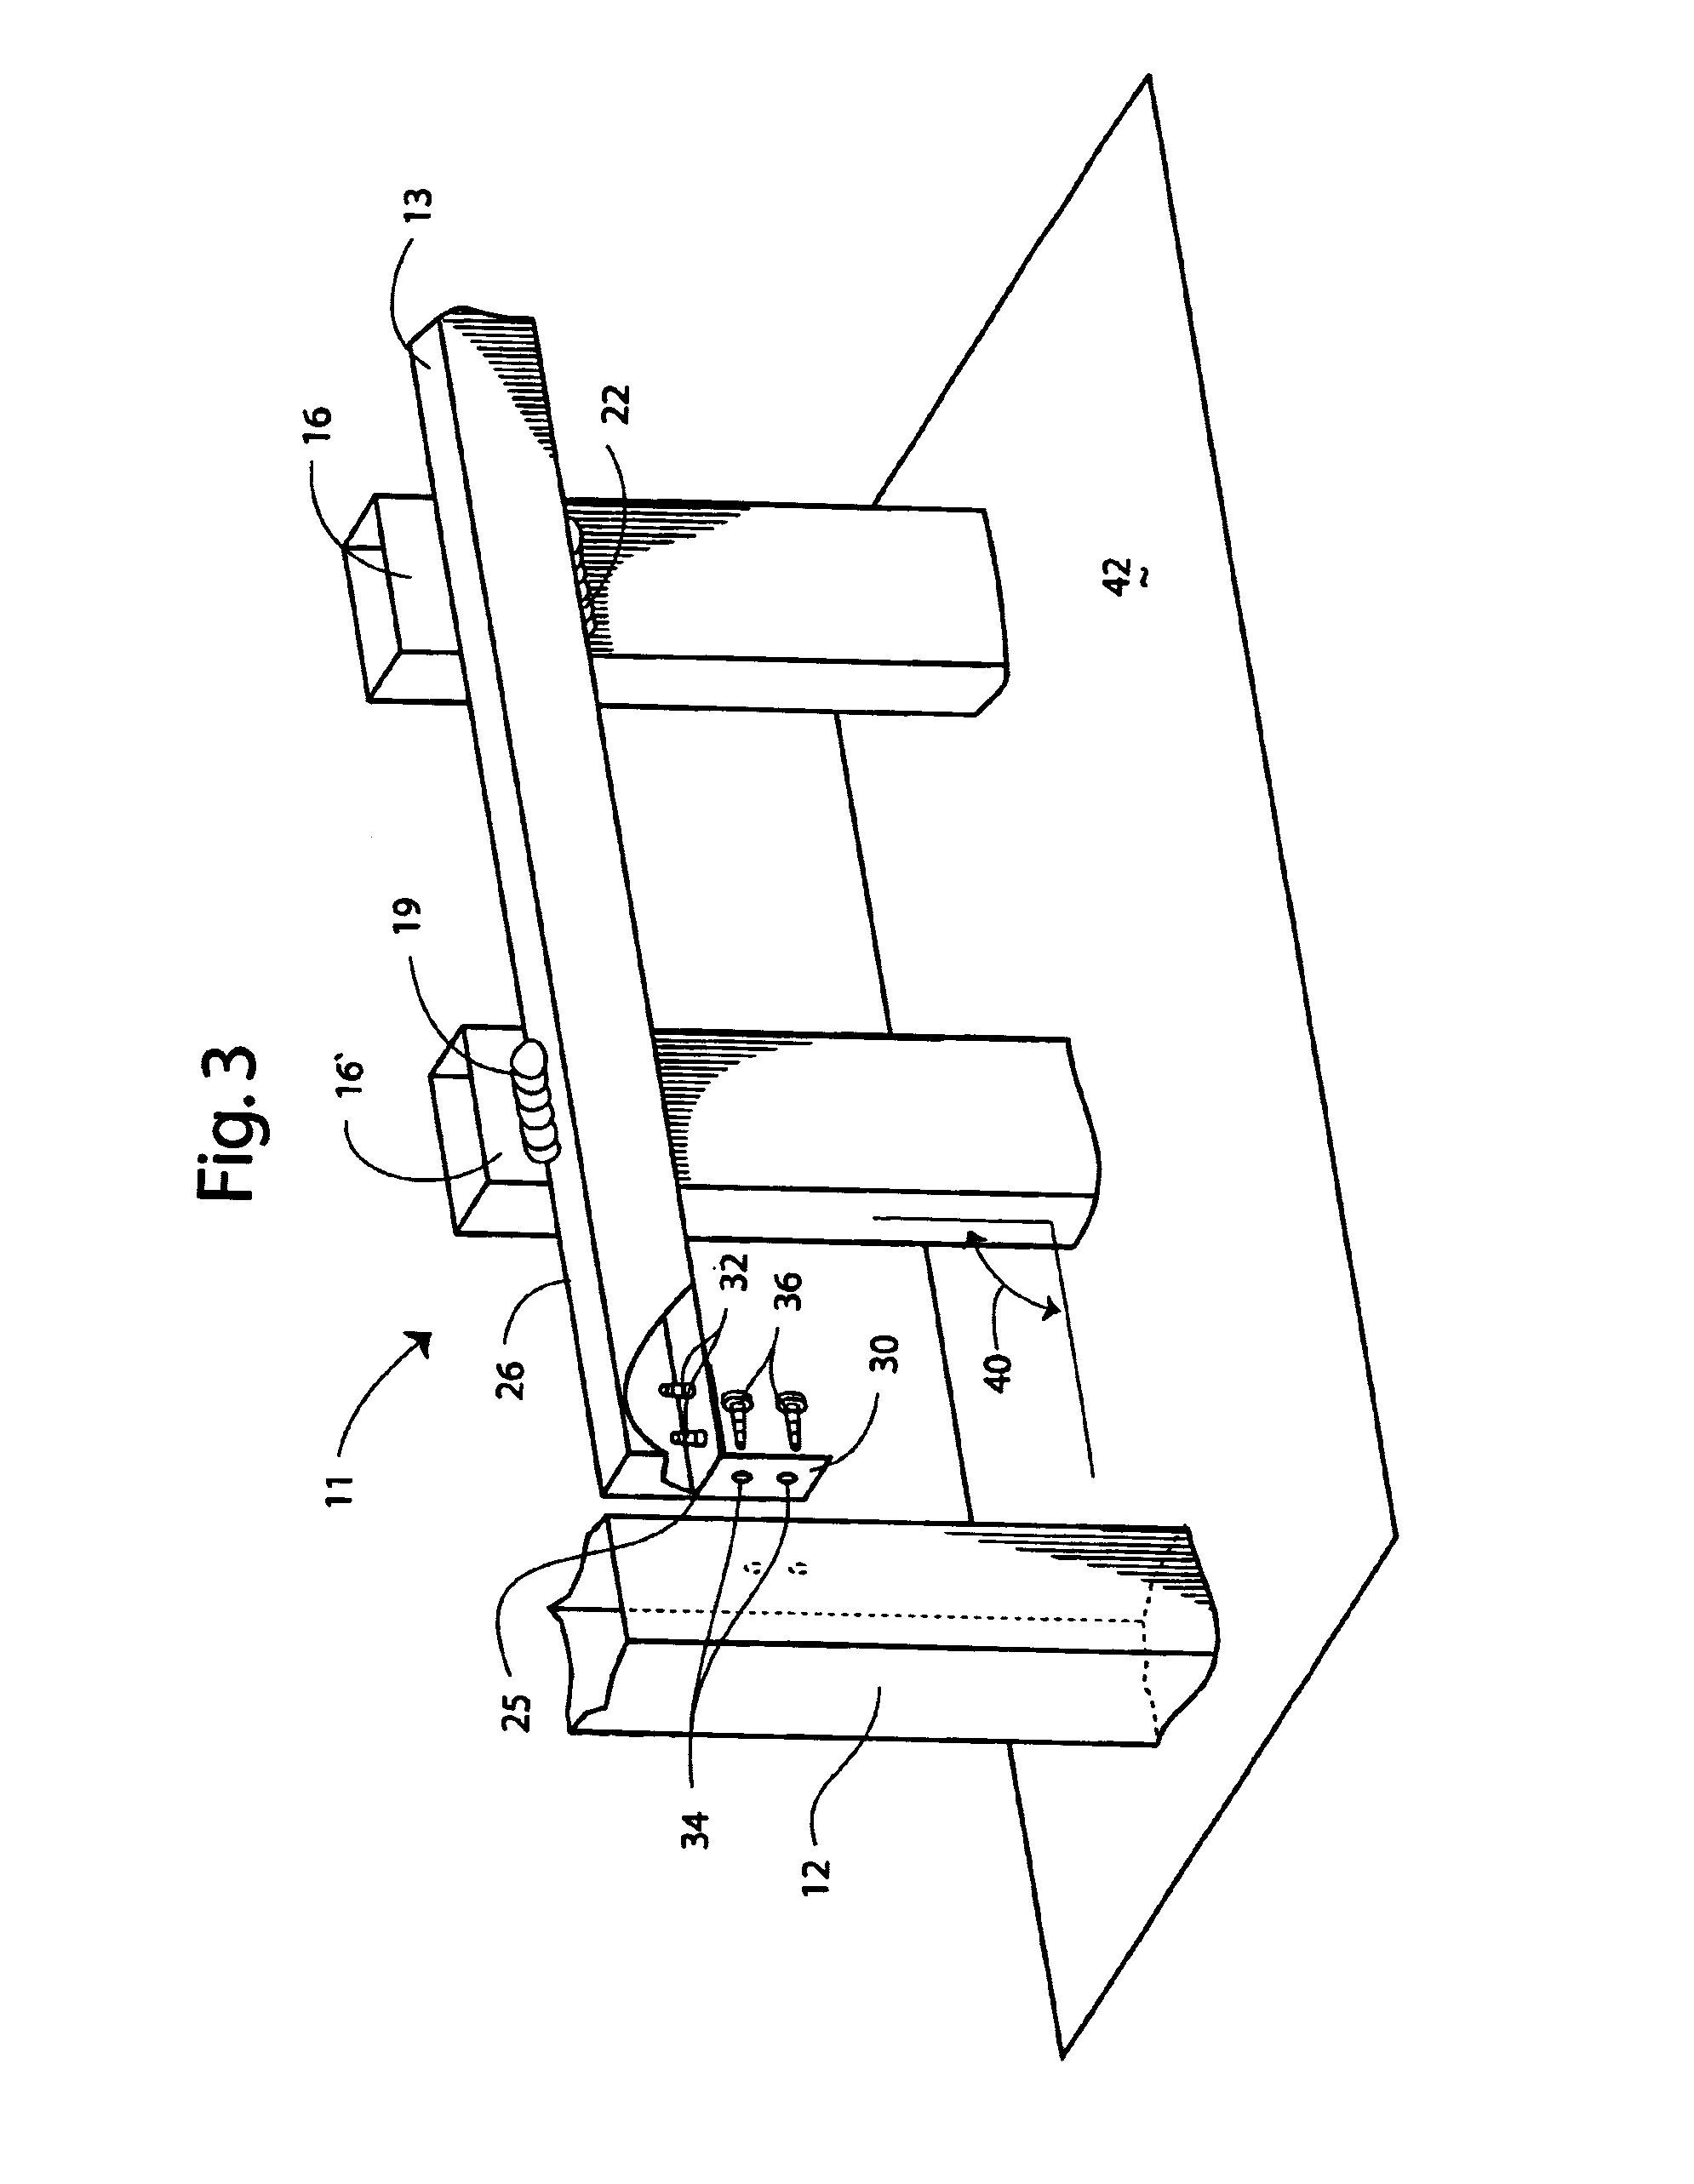 Fence and method of producing such